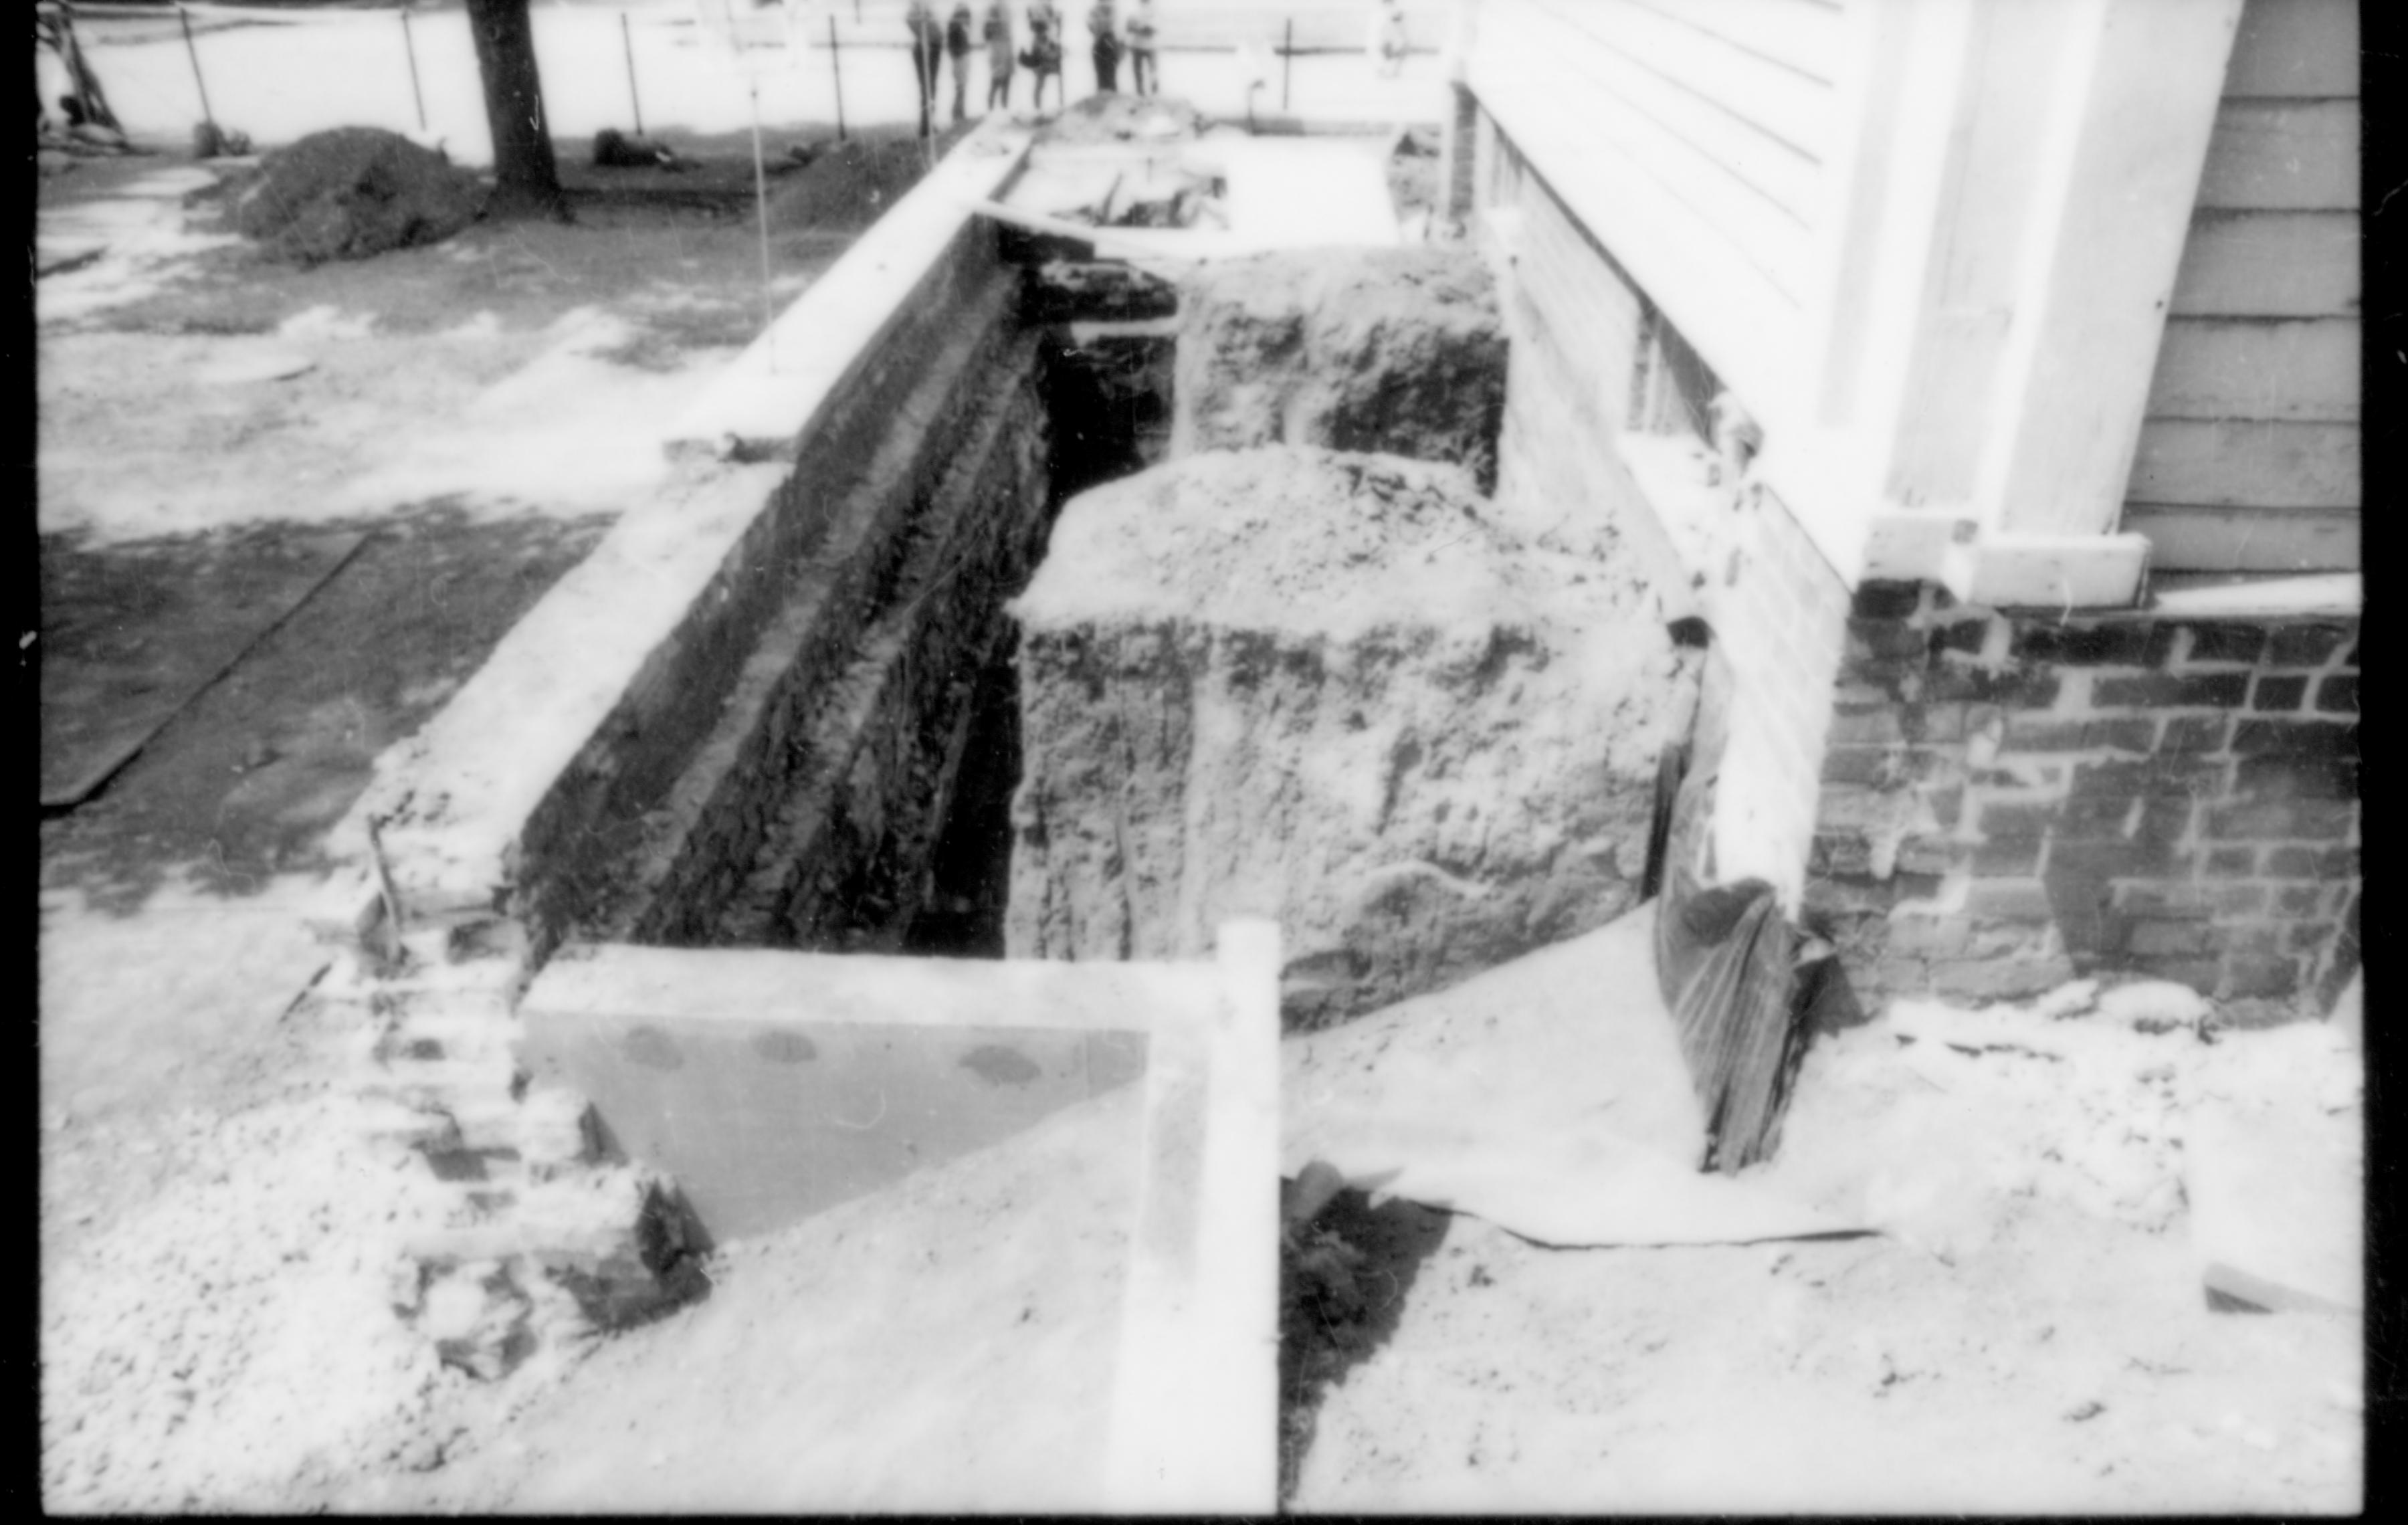 The wall foundation, yard, and retaining wall along the south side of the Lincoln Home during the 1987-88 restoration. At this point in the construction, the south porch had been removed (seen on the far right of the photo), as well as the fencing along the south and west sides of the lot. Photographer facing west.